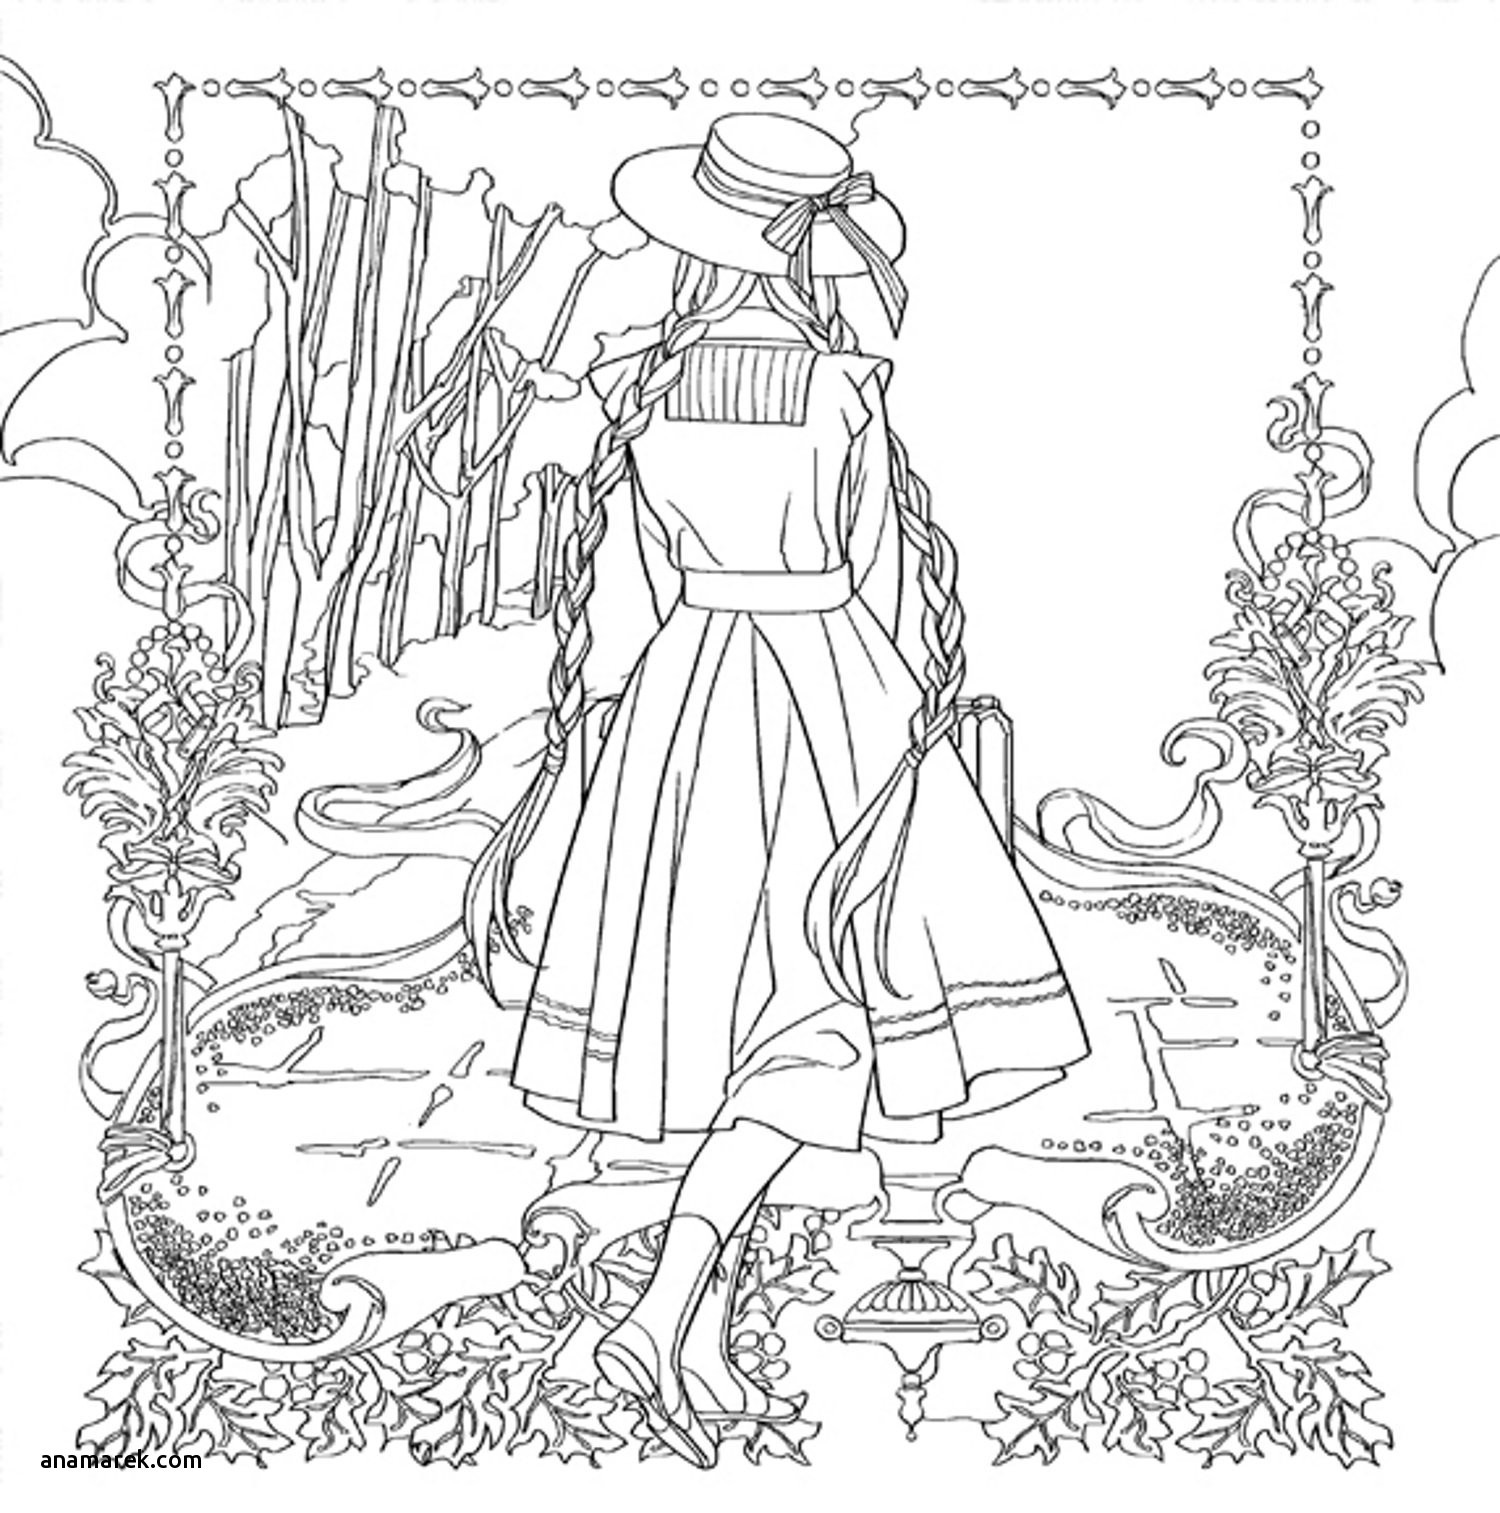 Modern Romance Coloring Book
 Modern Romance Coloring Book coloring page